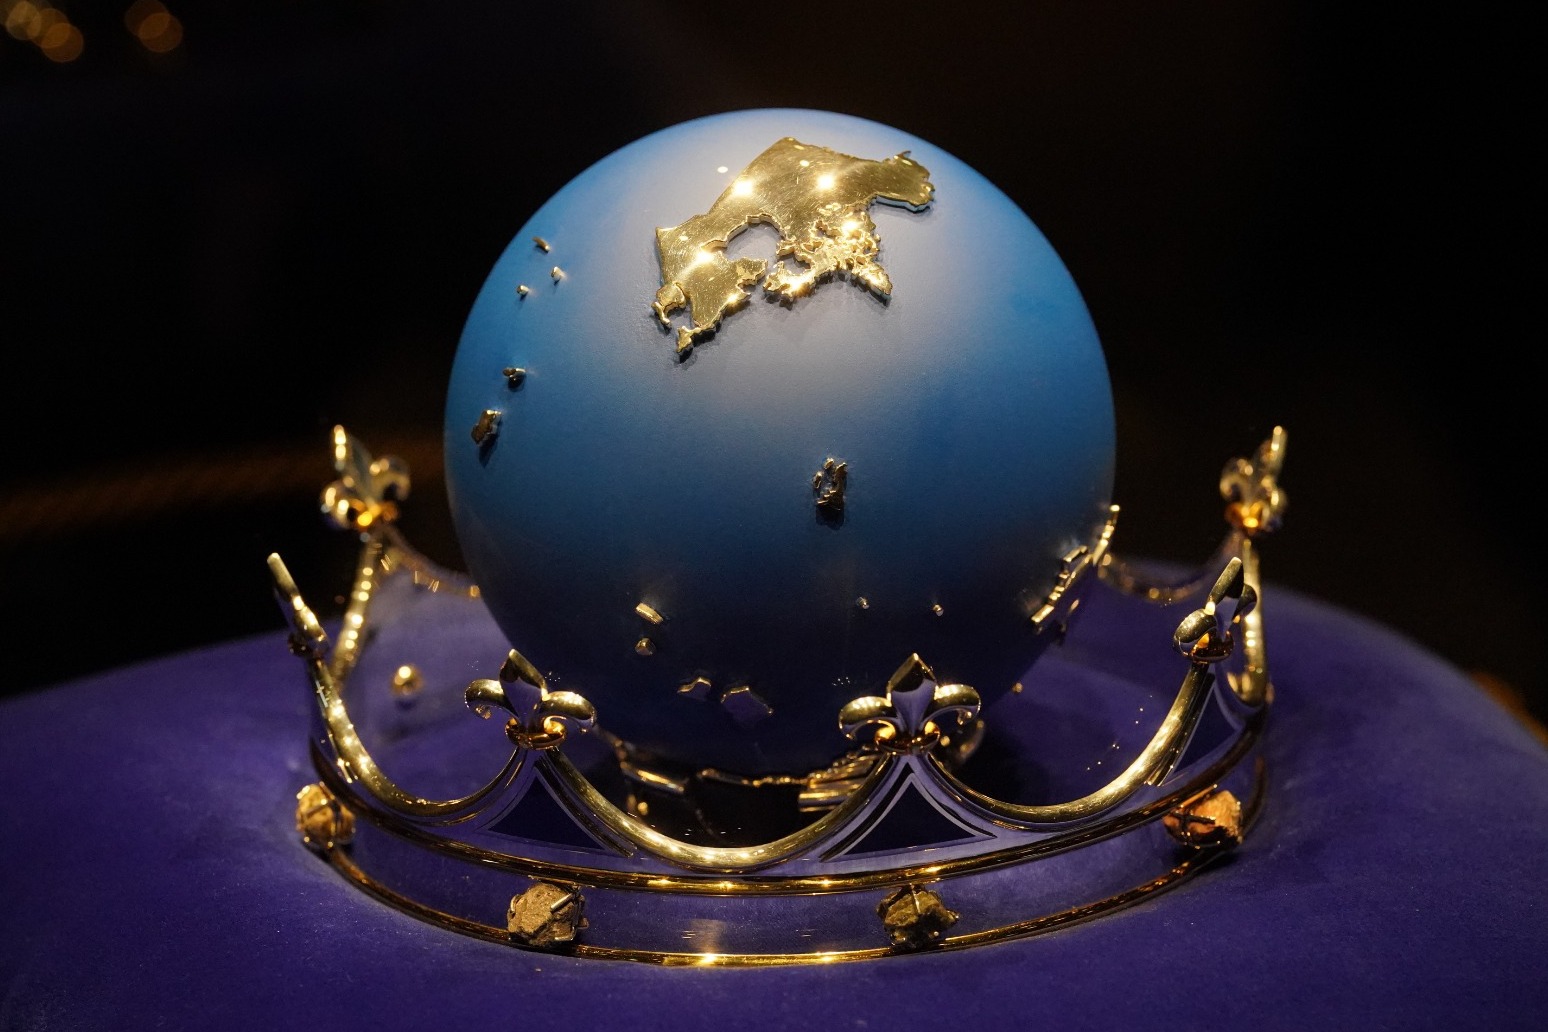 Commonwealth Globe unveiled at Tower of London for Platinum Jubilee 